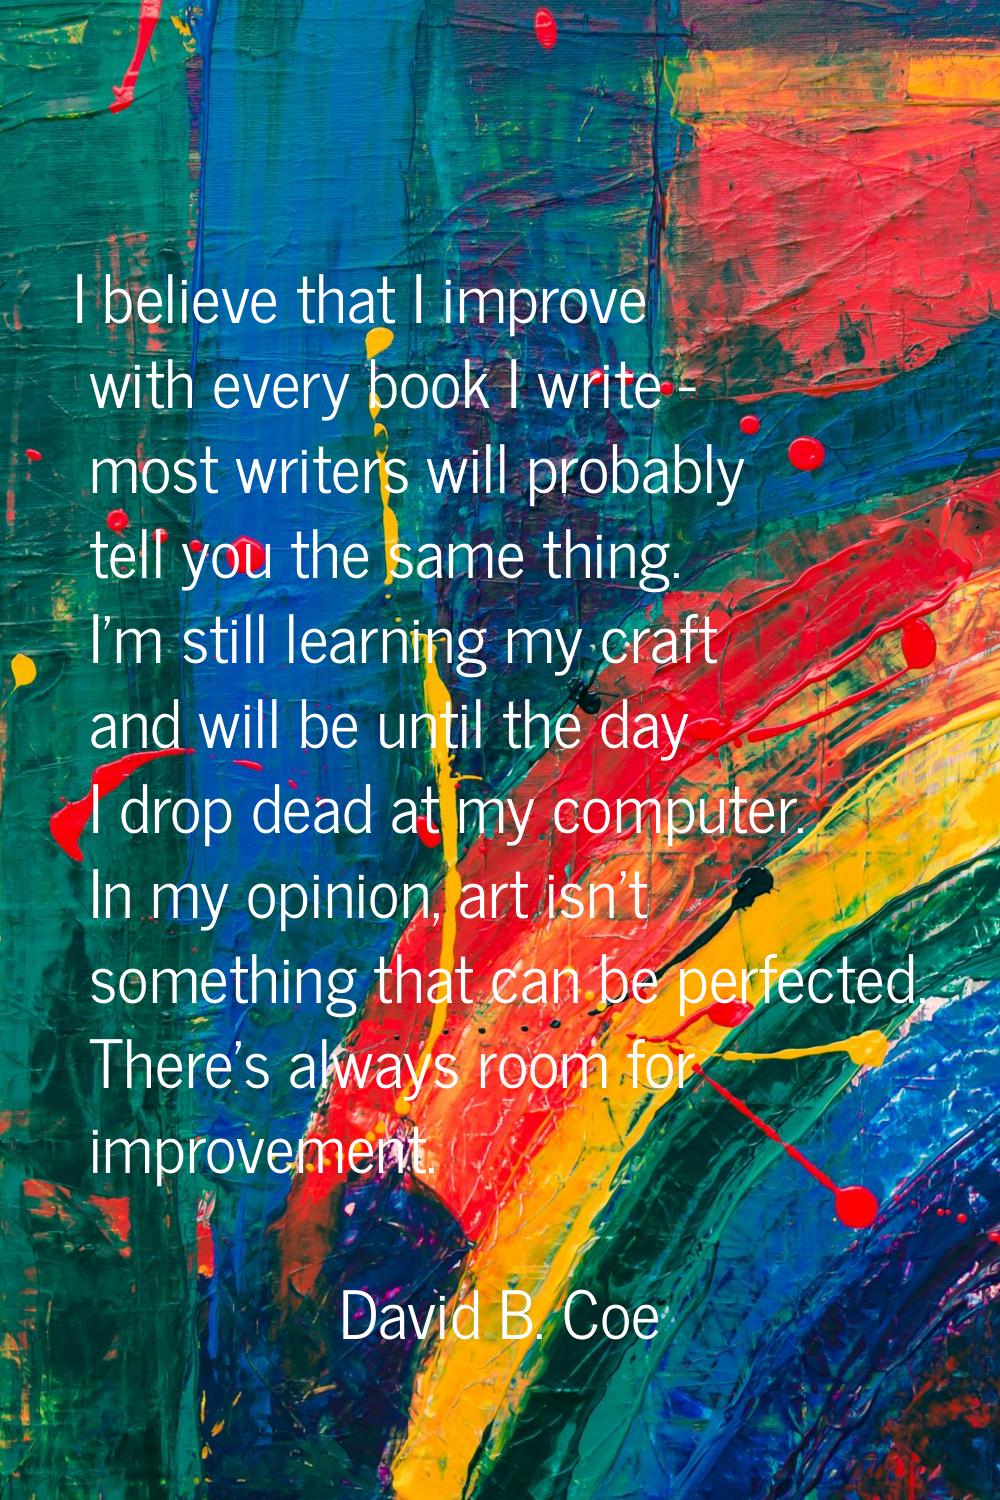 I believe that I improve with every book I write - most writers will probably tell you the same thi